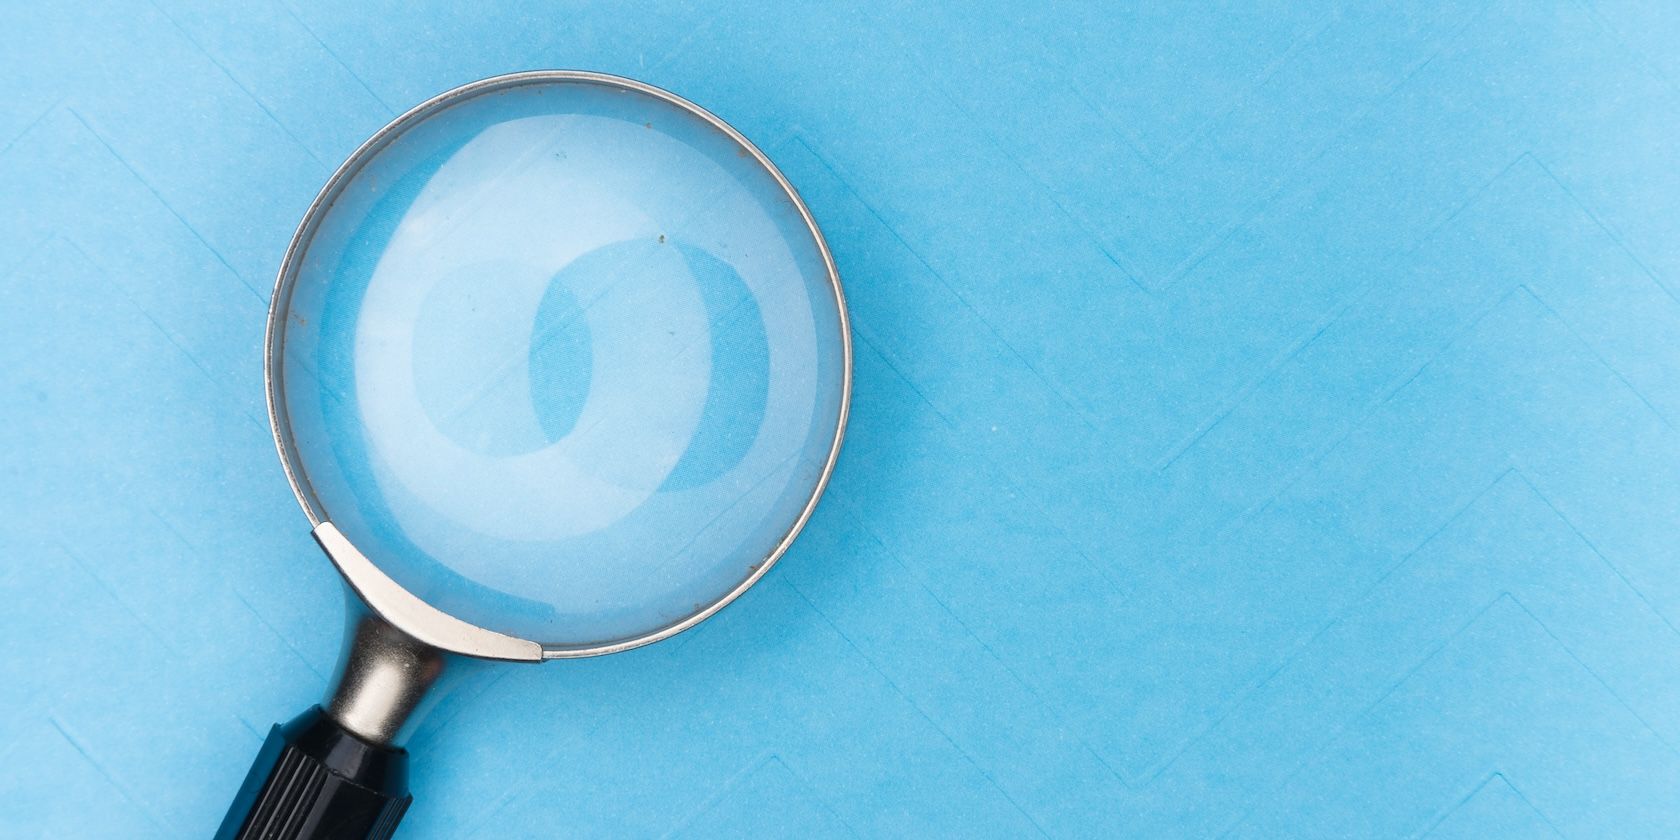 A large magnifying glass on a blue background